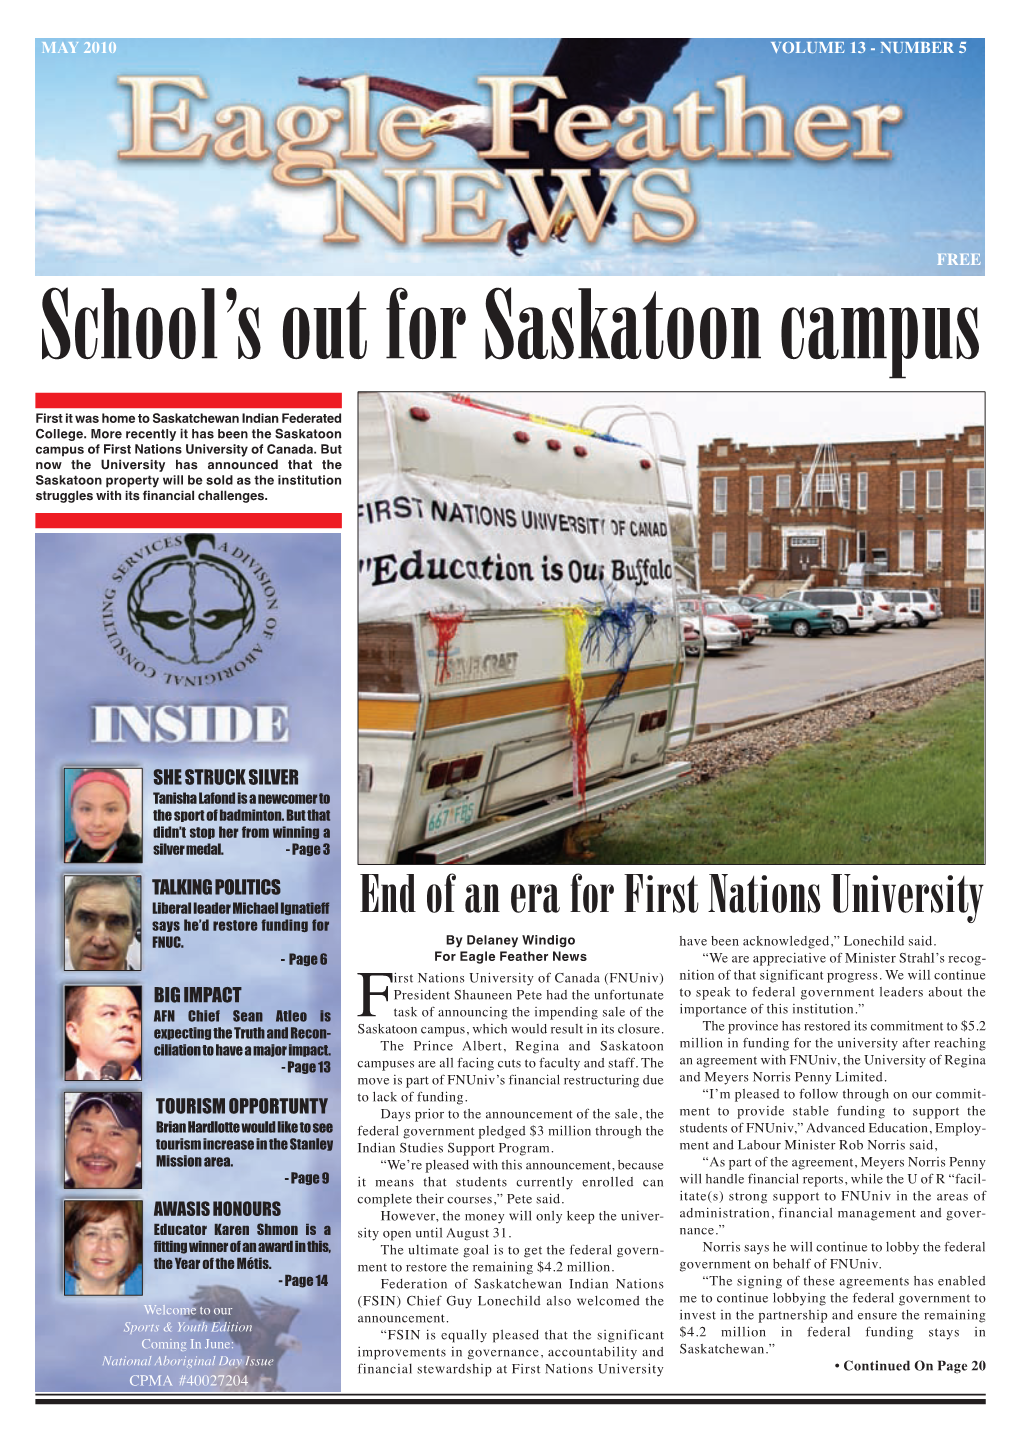 School's out for Saskatoon Campus